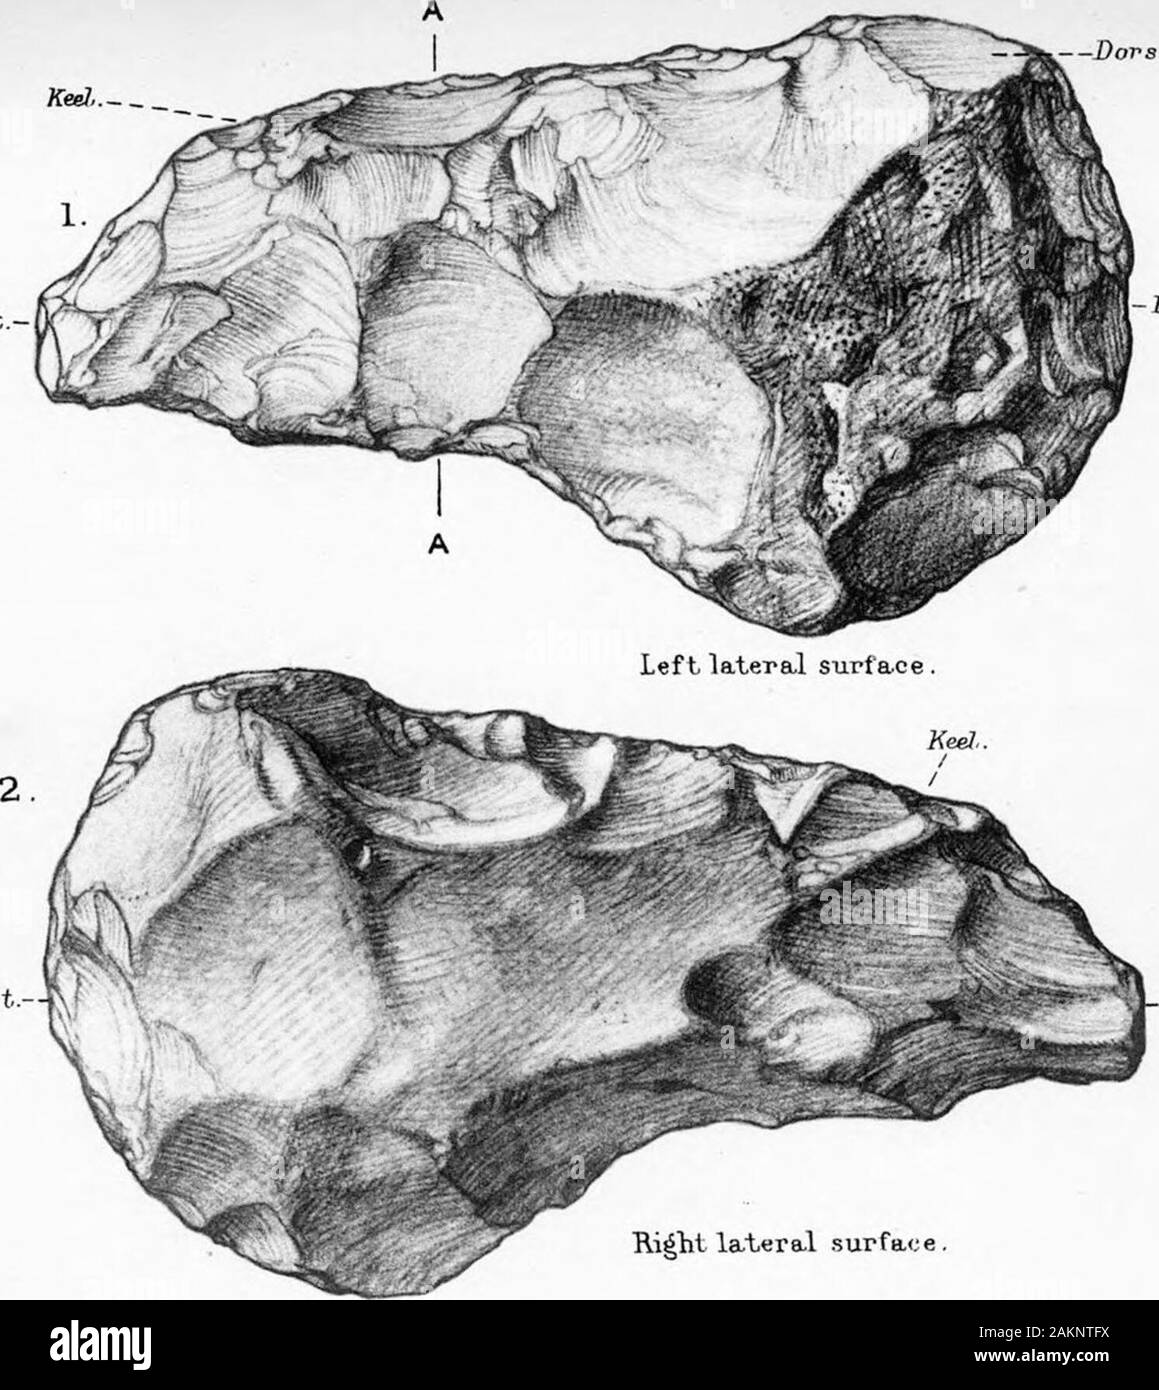 The Transition from Rostro-Carinate Flint Implements to the Tongue-Shaped Implements of River-Terrace Gravels . PoKt.Ventra.1 surface. Post,. Dorsal aurfact; Plate 52.(84/100 actual size.)Another specimen from same gravel pit as above, also found and presented byRev. H. G. O. Kendall. Positions of sections indicated by vertical lines in fig. 1.. —DorsaL platform... A-nt. Stock Photo